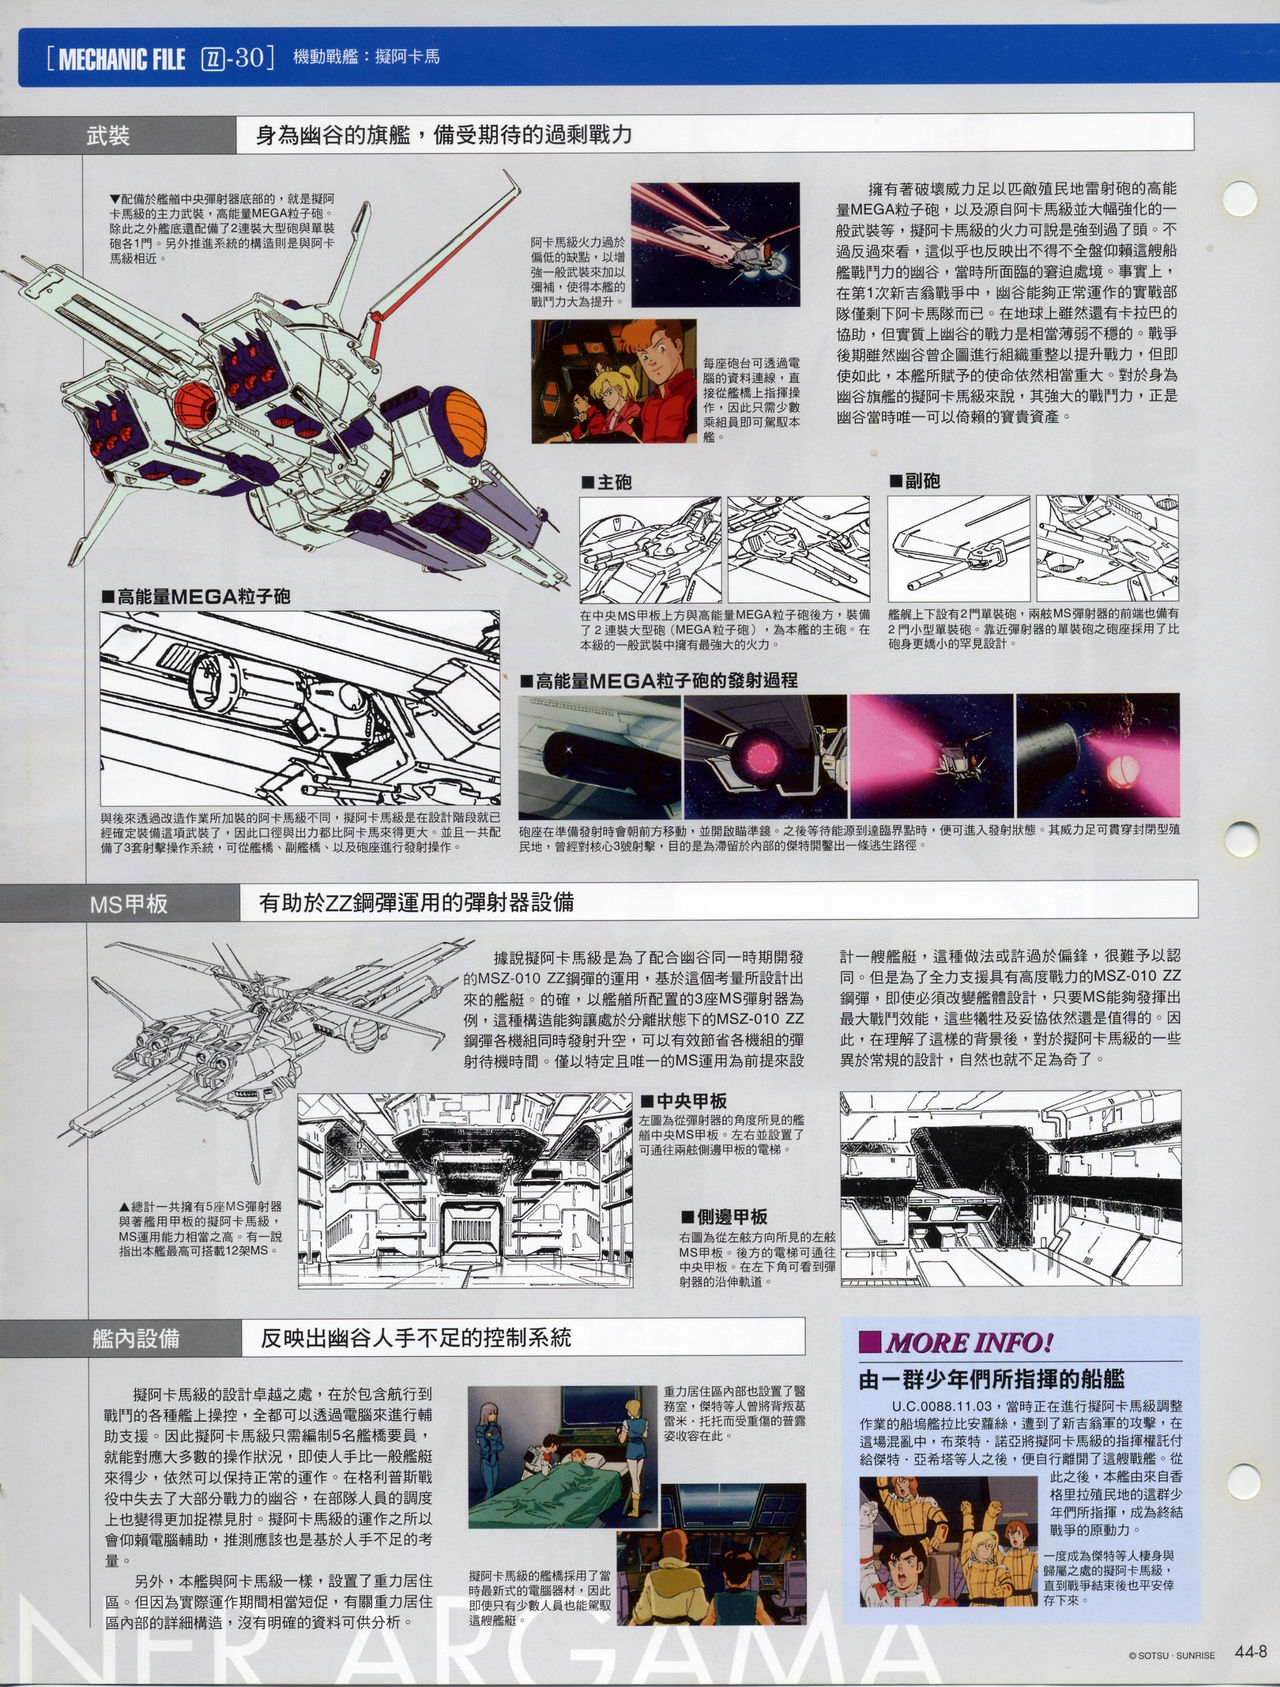 The Official Gundam Fact File - 044 [Chinese] 10